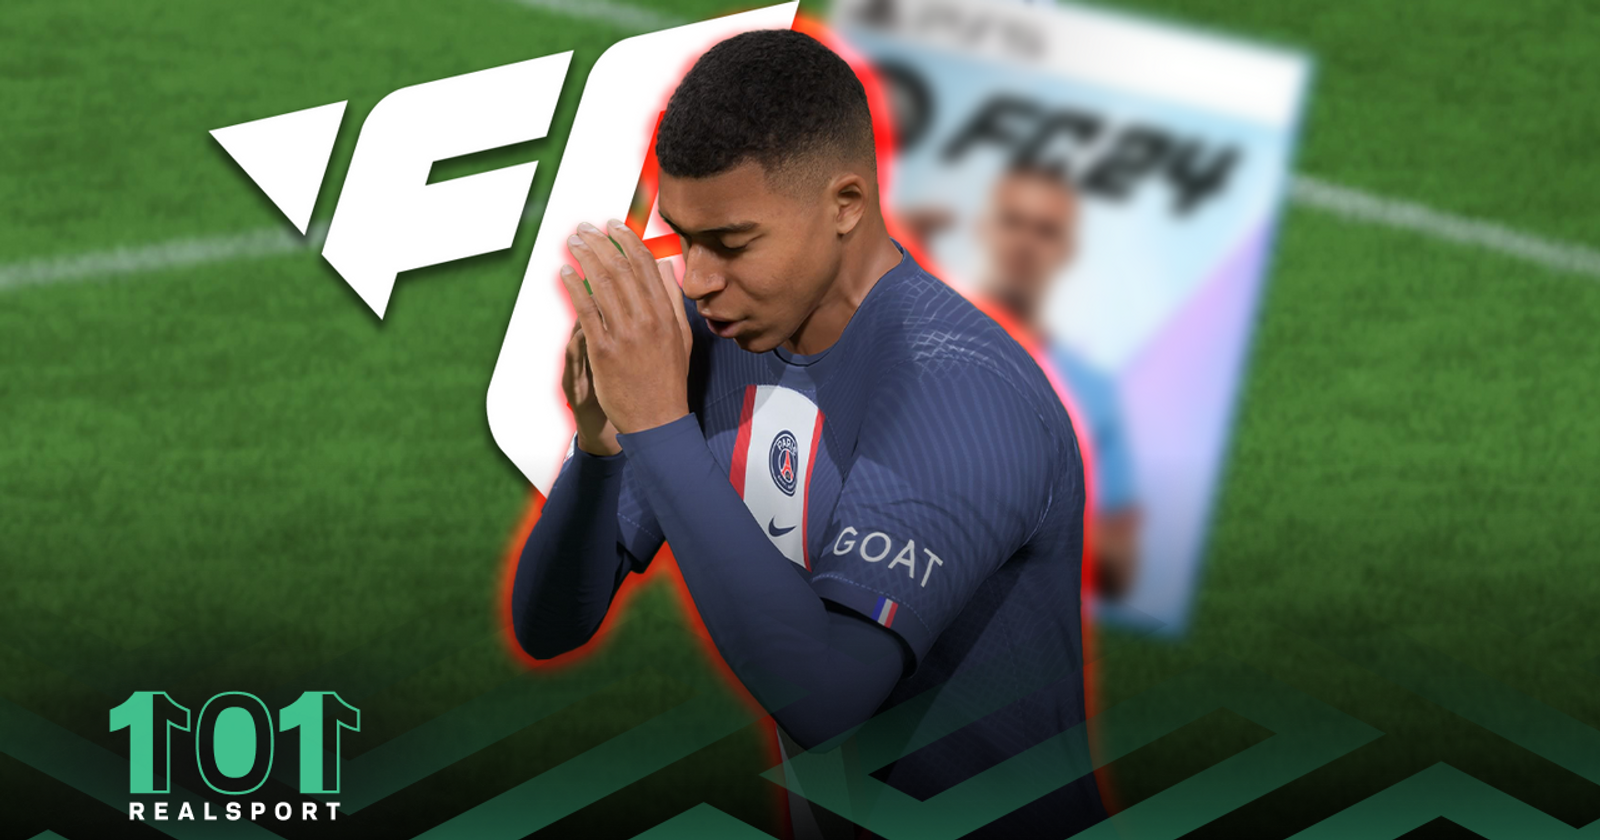 FIFA 23 standard edition cover star is Kylian Mbappe